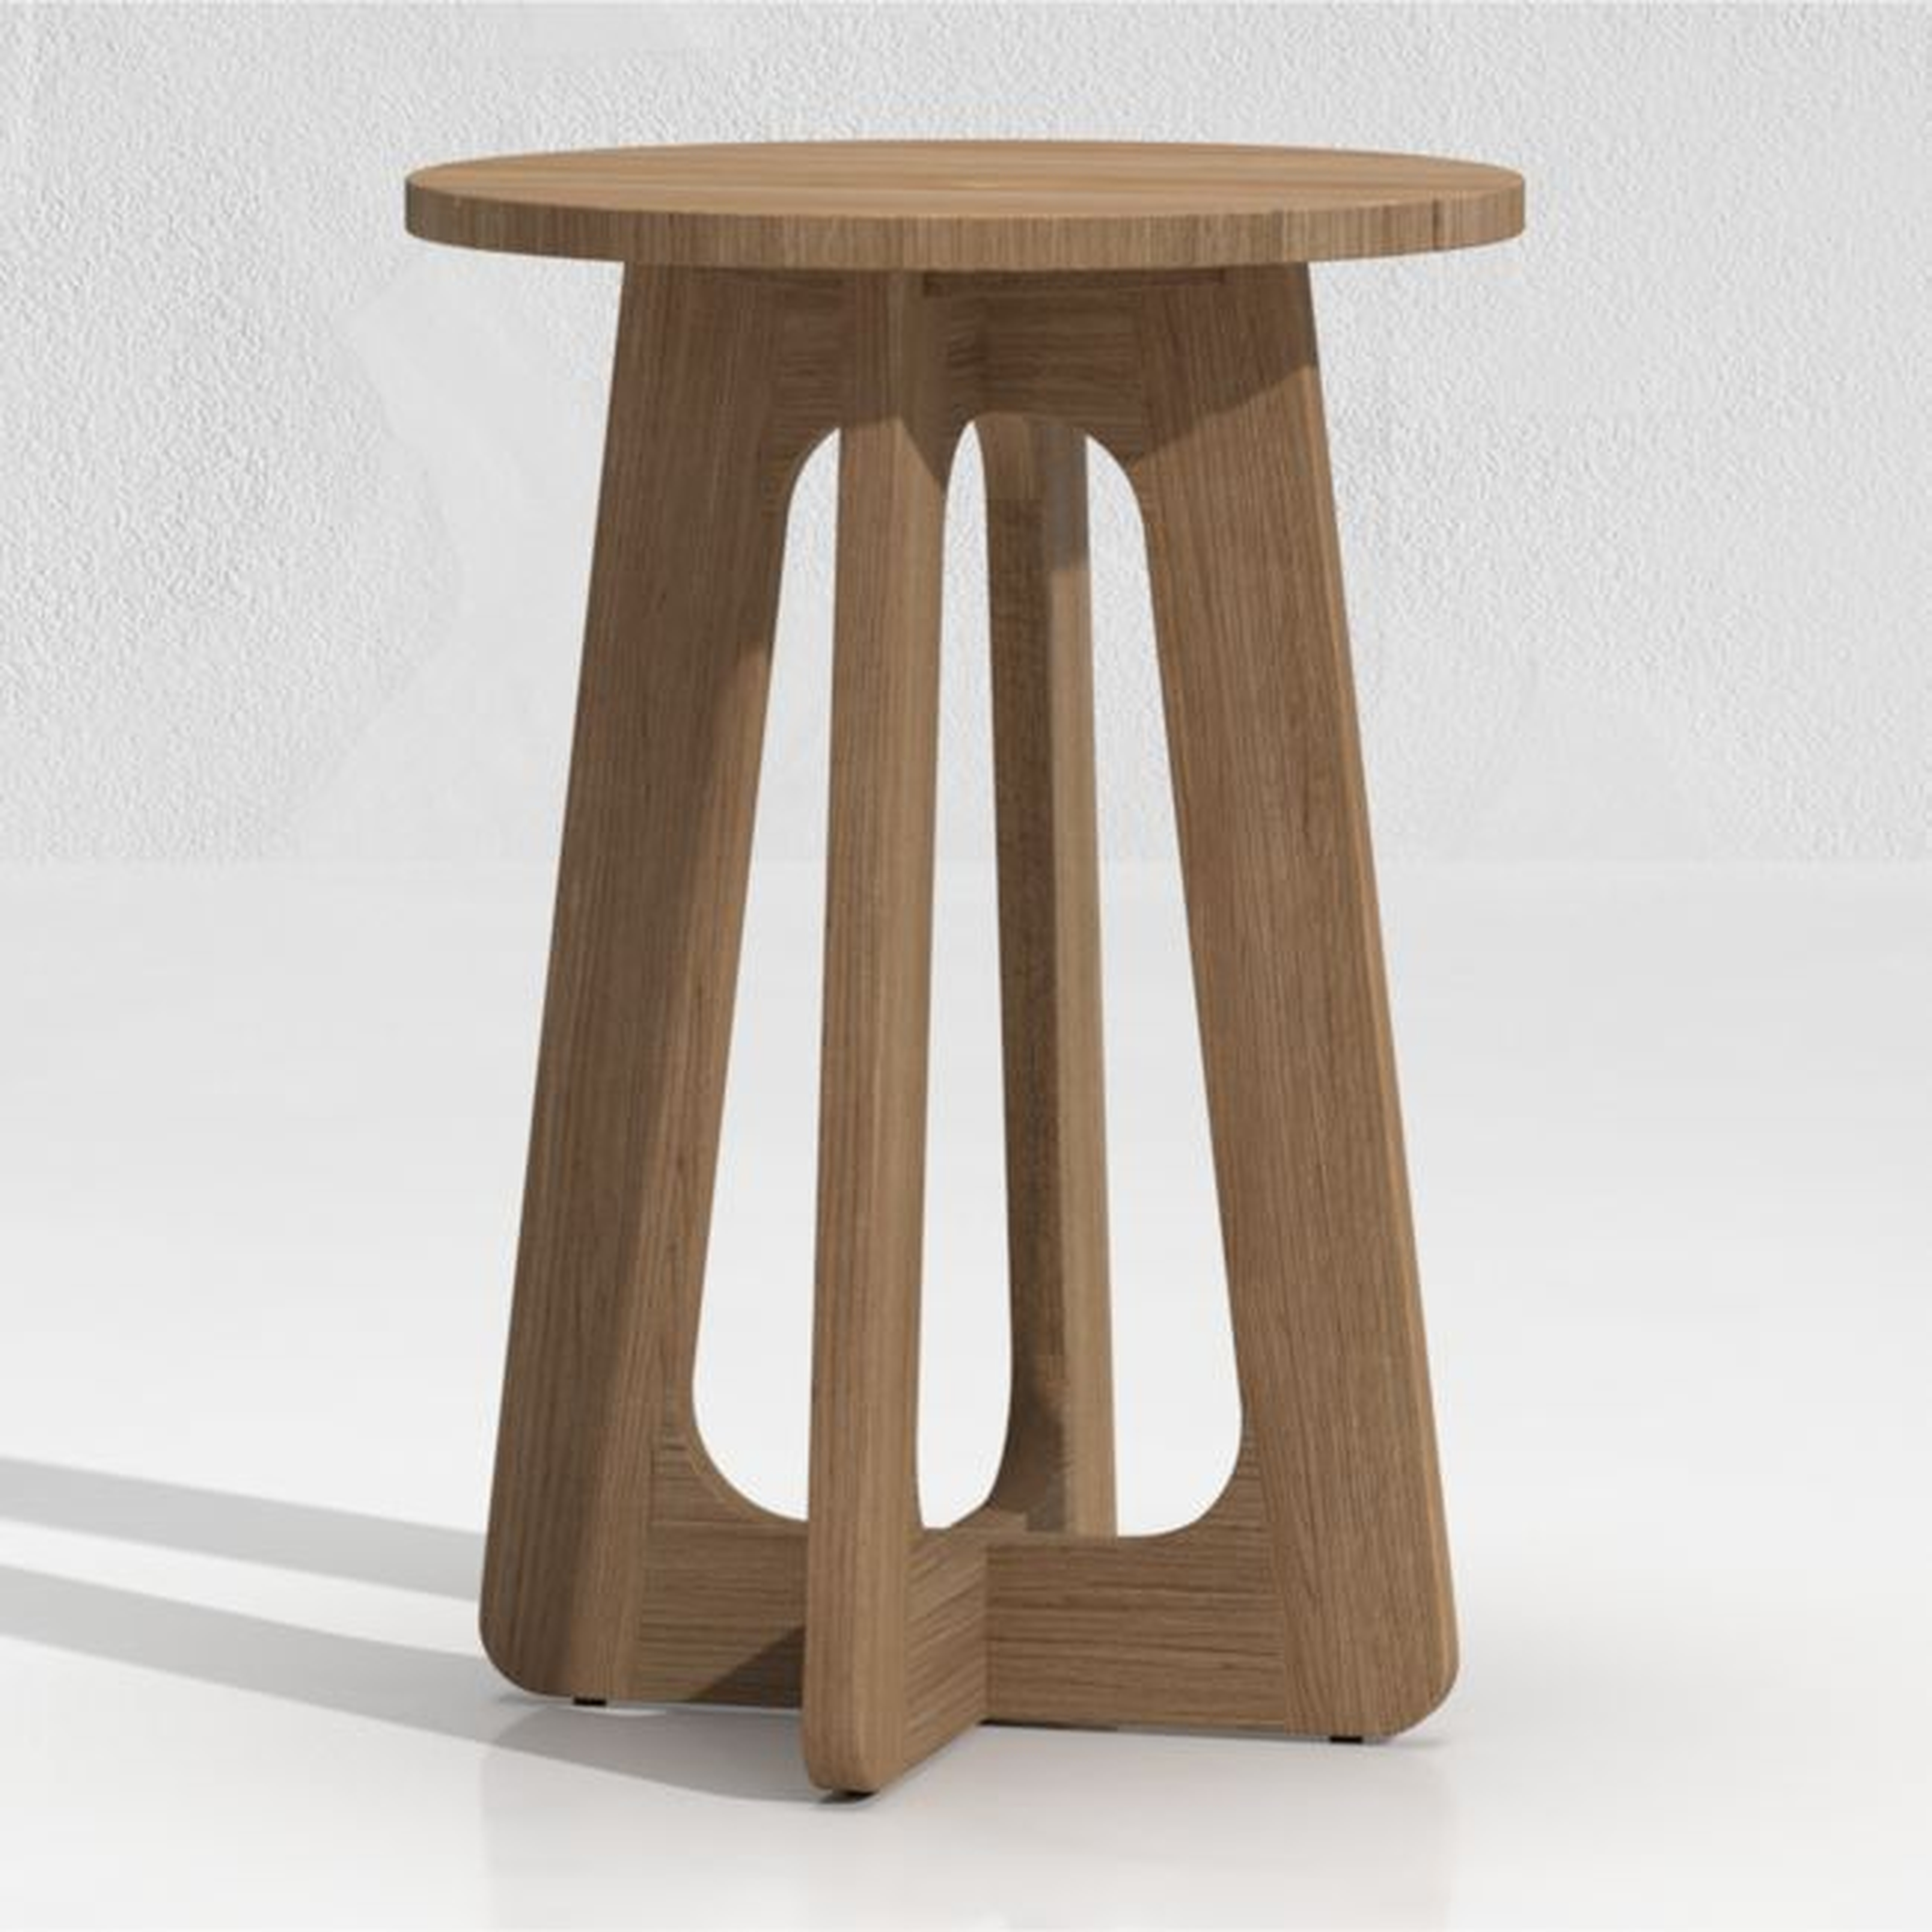 Ekland Tall Teak Nesting Table - Crate and Barrel